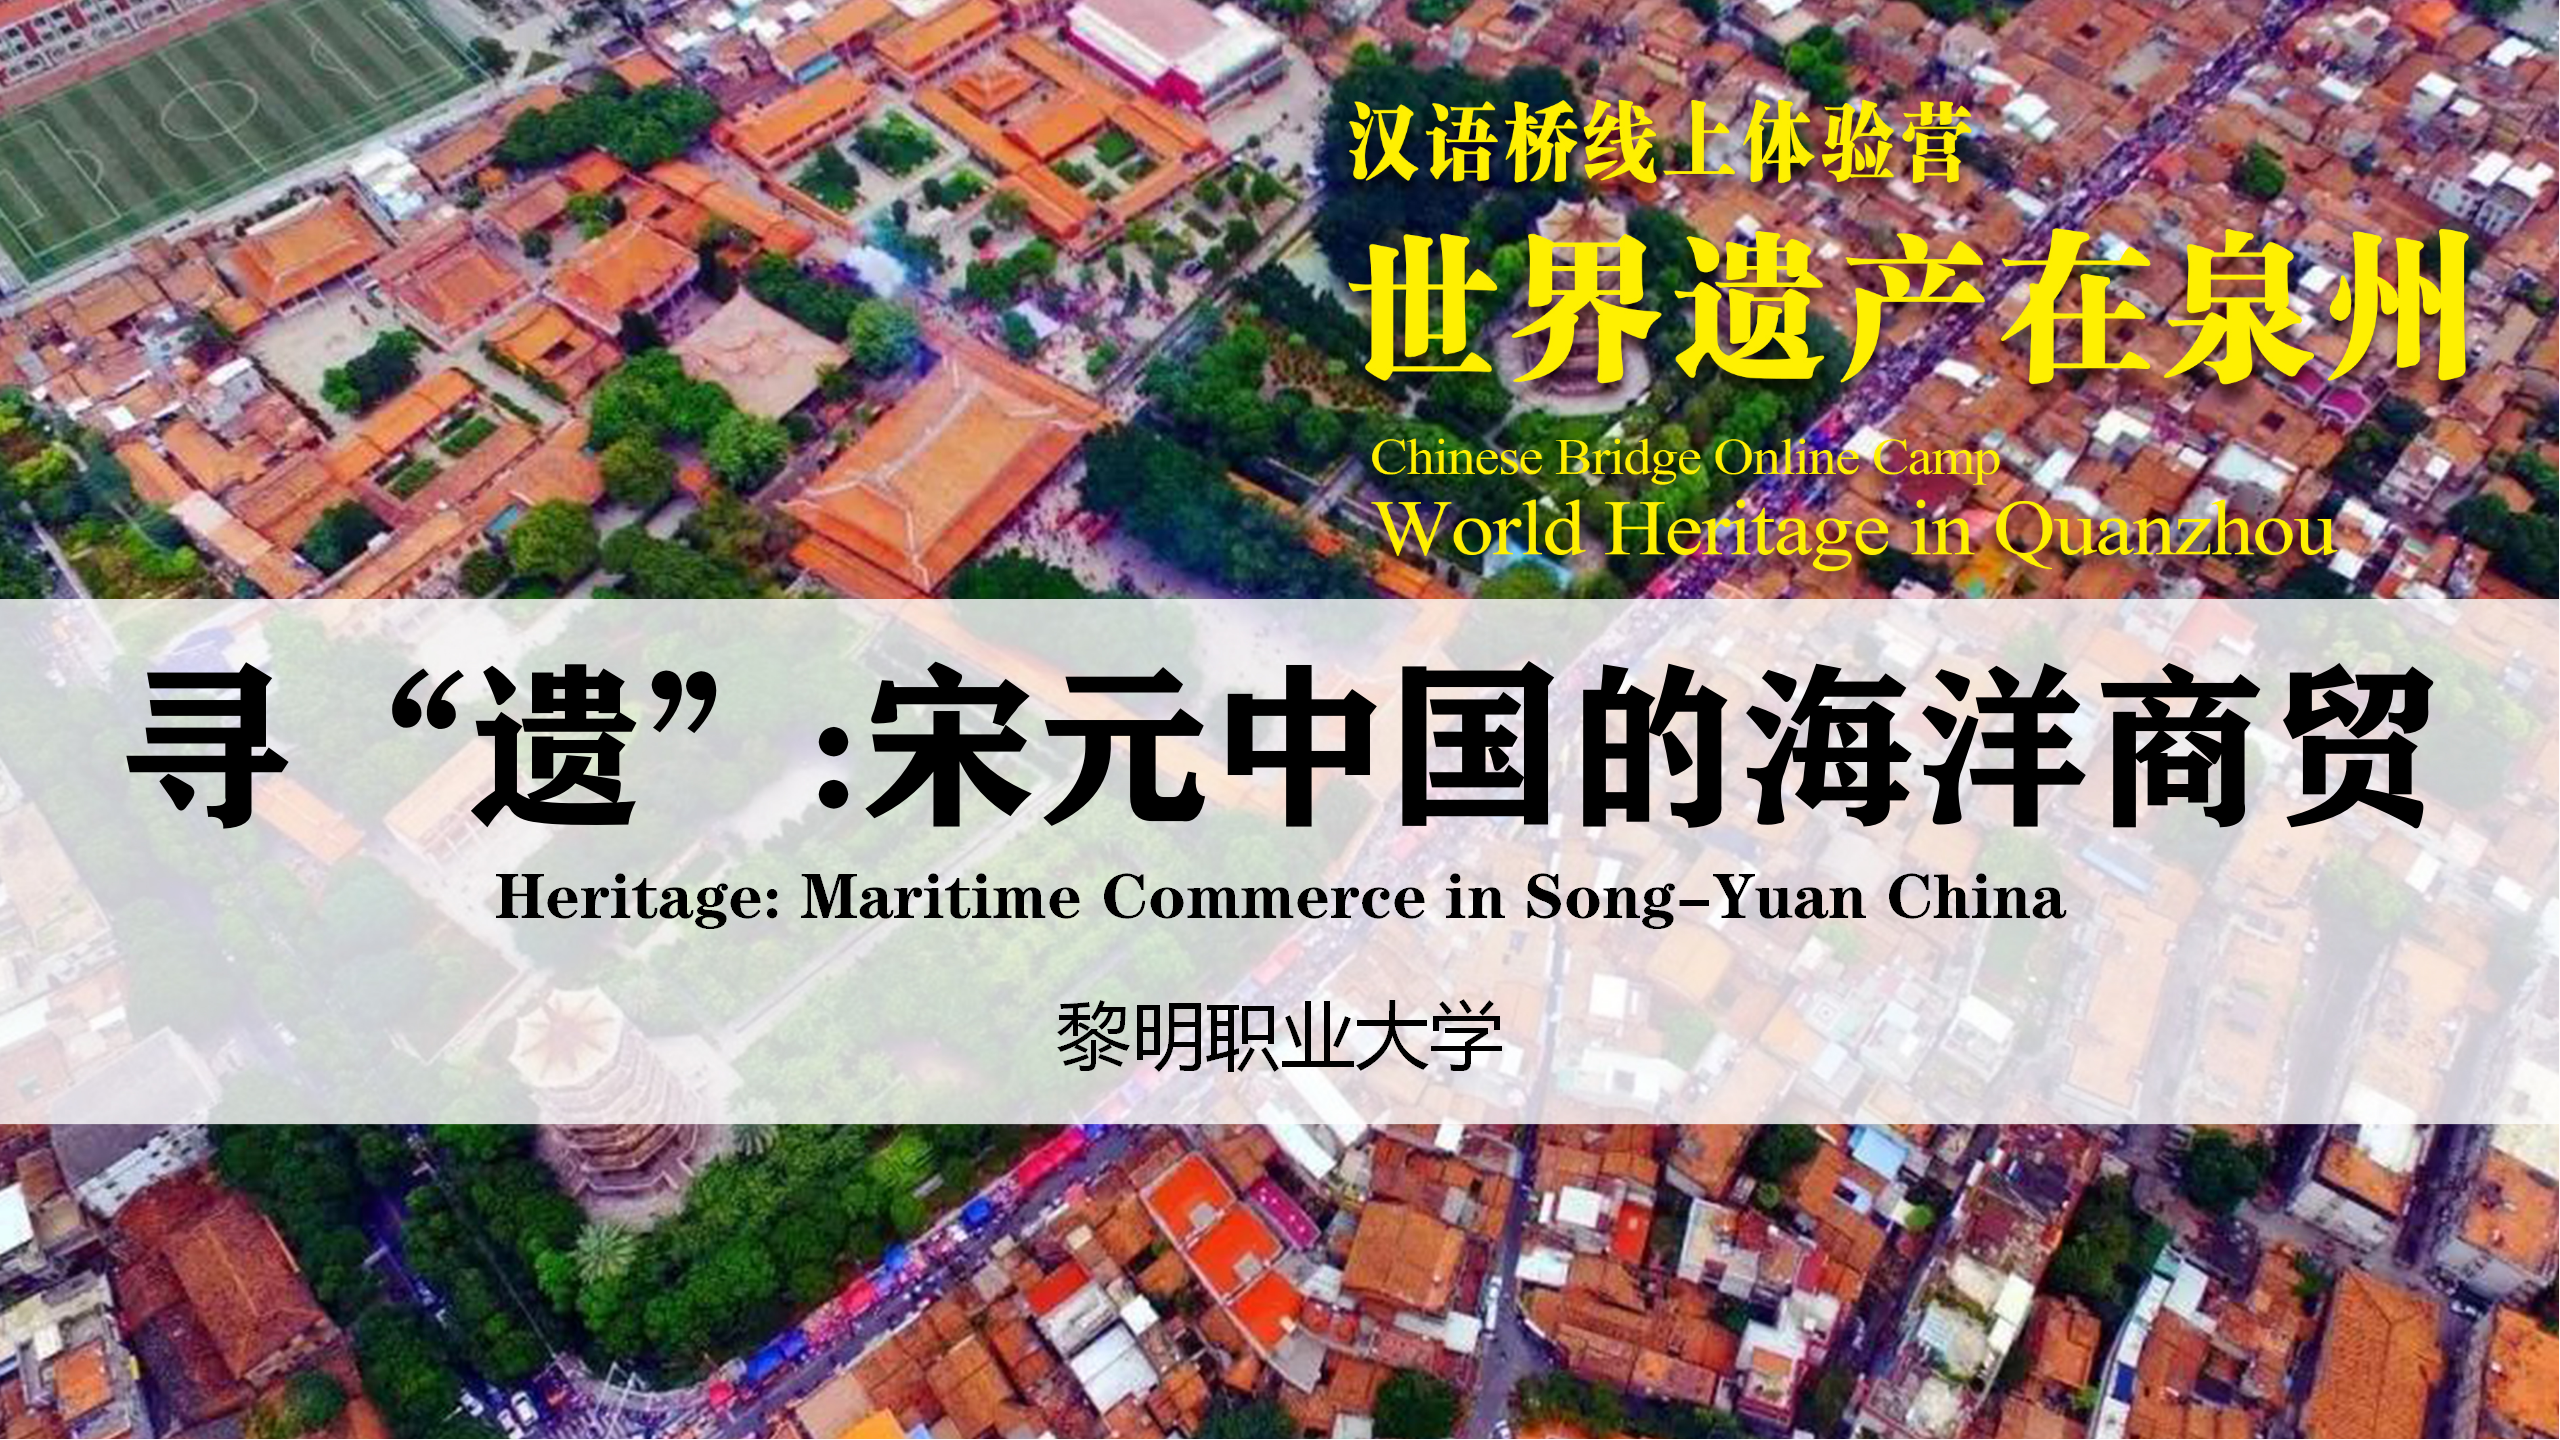 Heritage: Maritime Commerce in Song-Yuan China